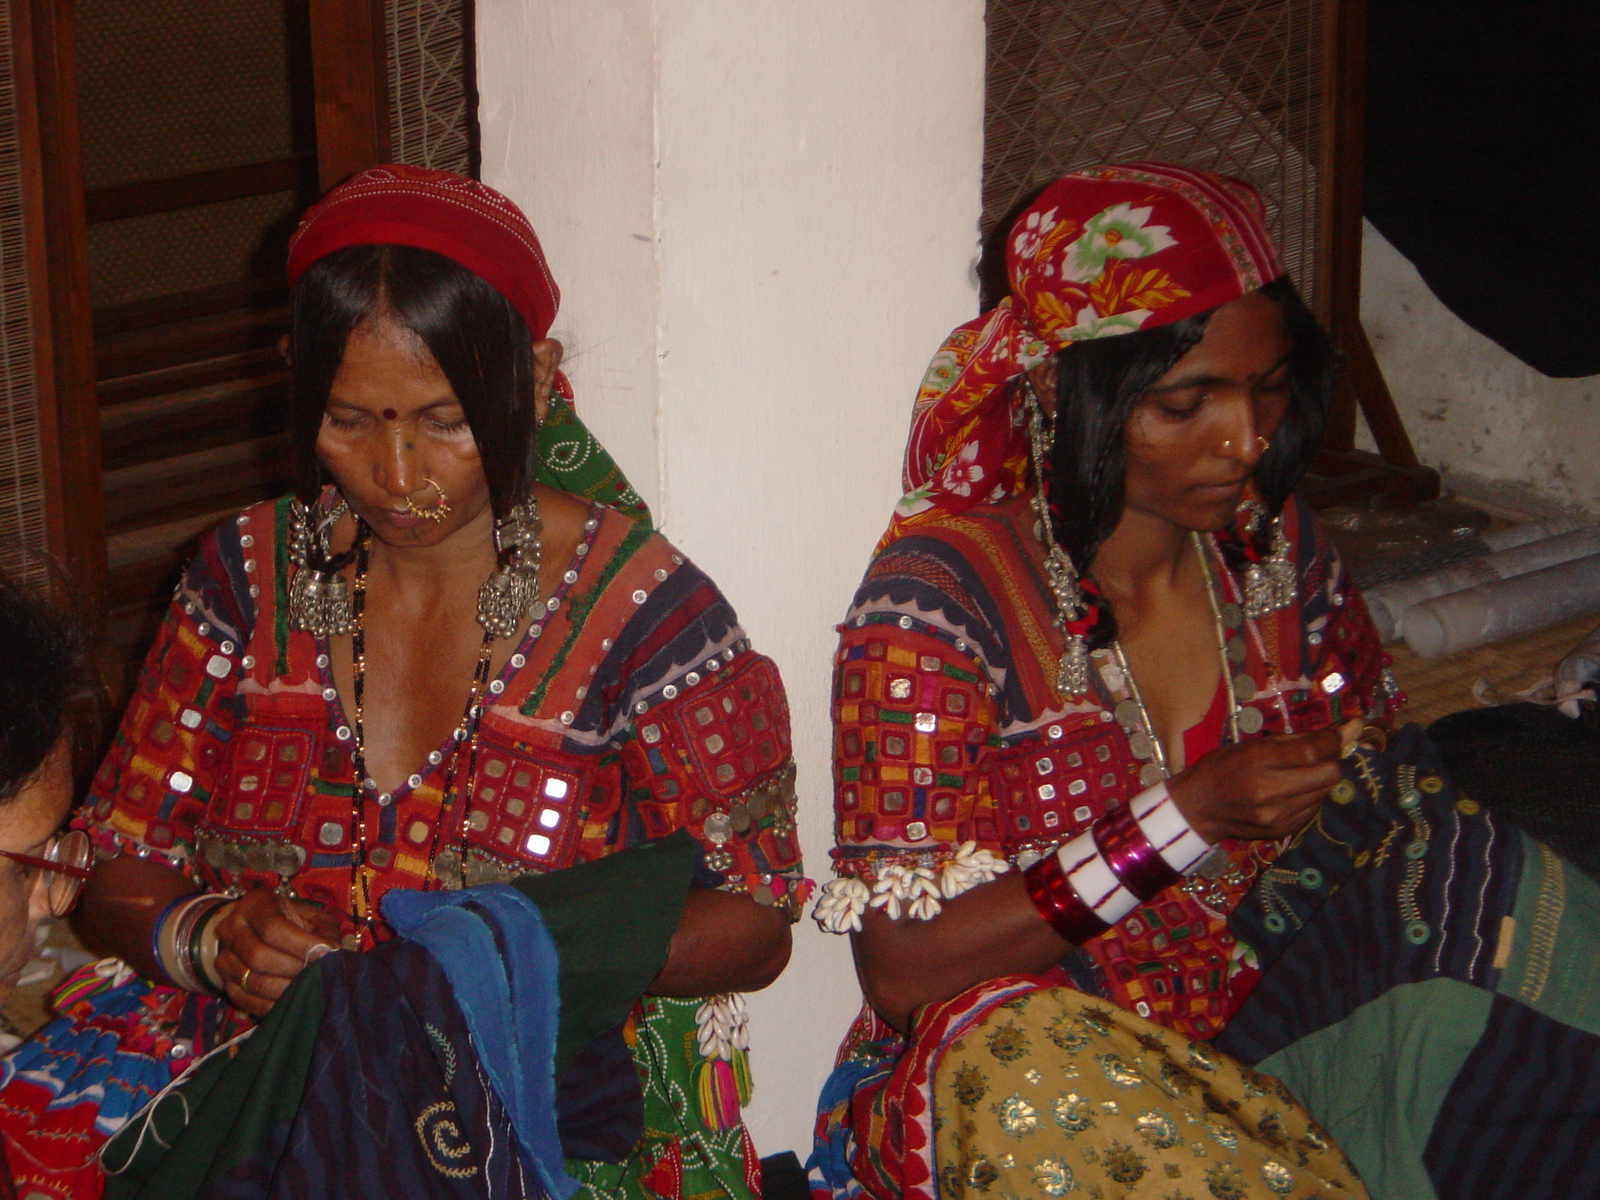 Two women from 'Banjara' community doing embroidery // Image: Encyclocraftsapr